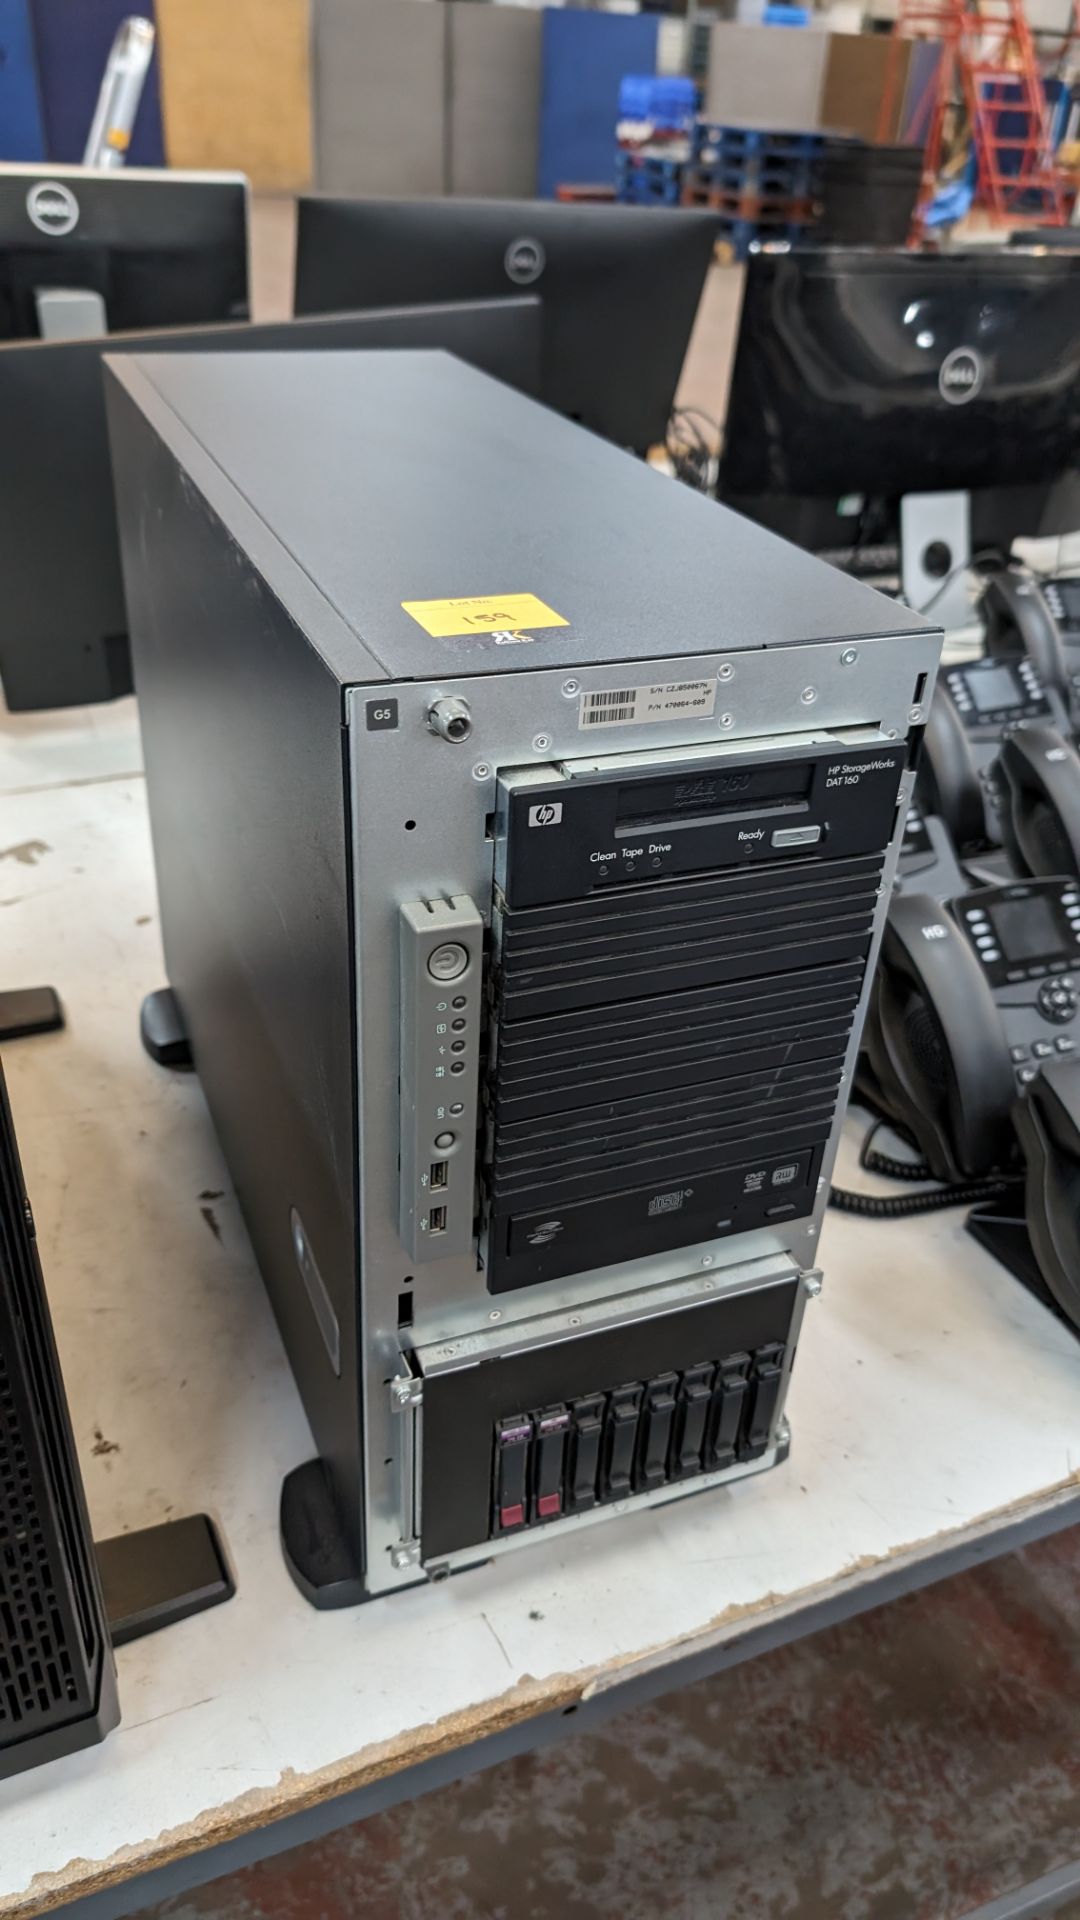 HP server incorporating 2 off hot swap drives, optical drive & HP Storageworks DAT 160 tape drive - Image 3 of 15